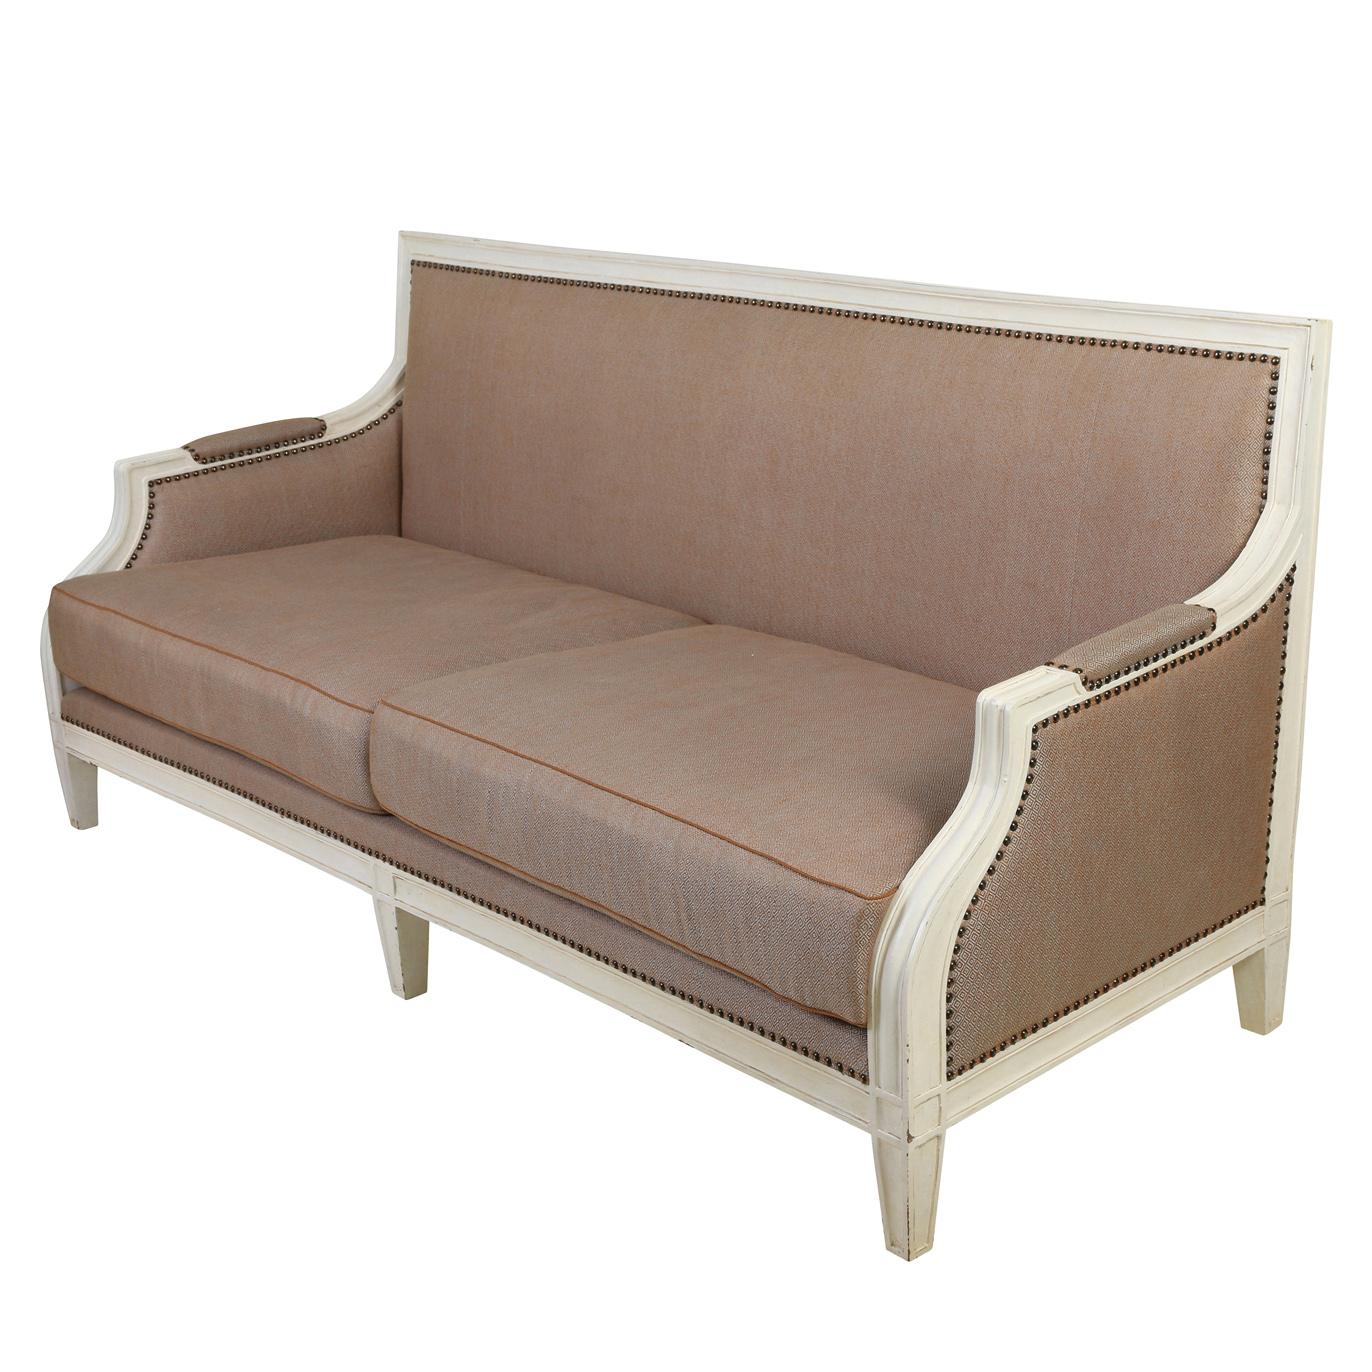 A vintage French painted white frame sofa with dark beige fabric upholstery, tight back, two cushion seat, padded armrests, nail head trim, and straight back and legs.